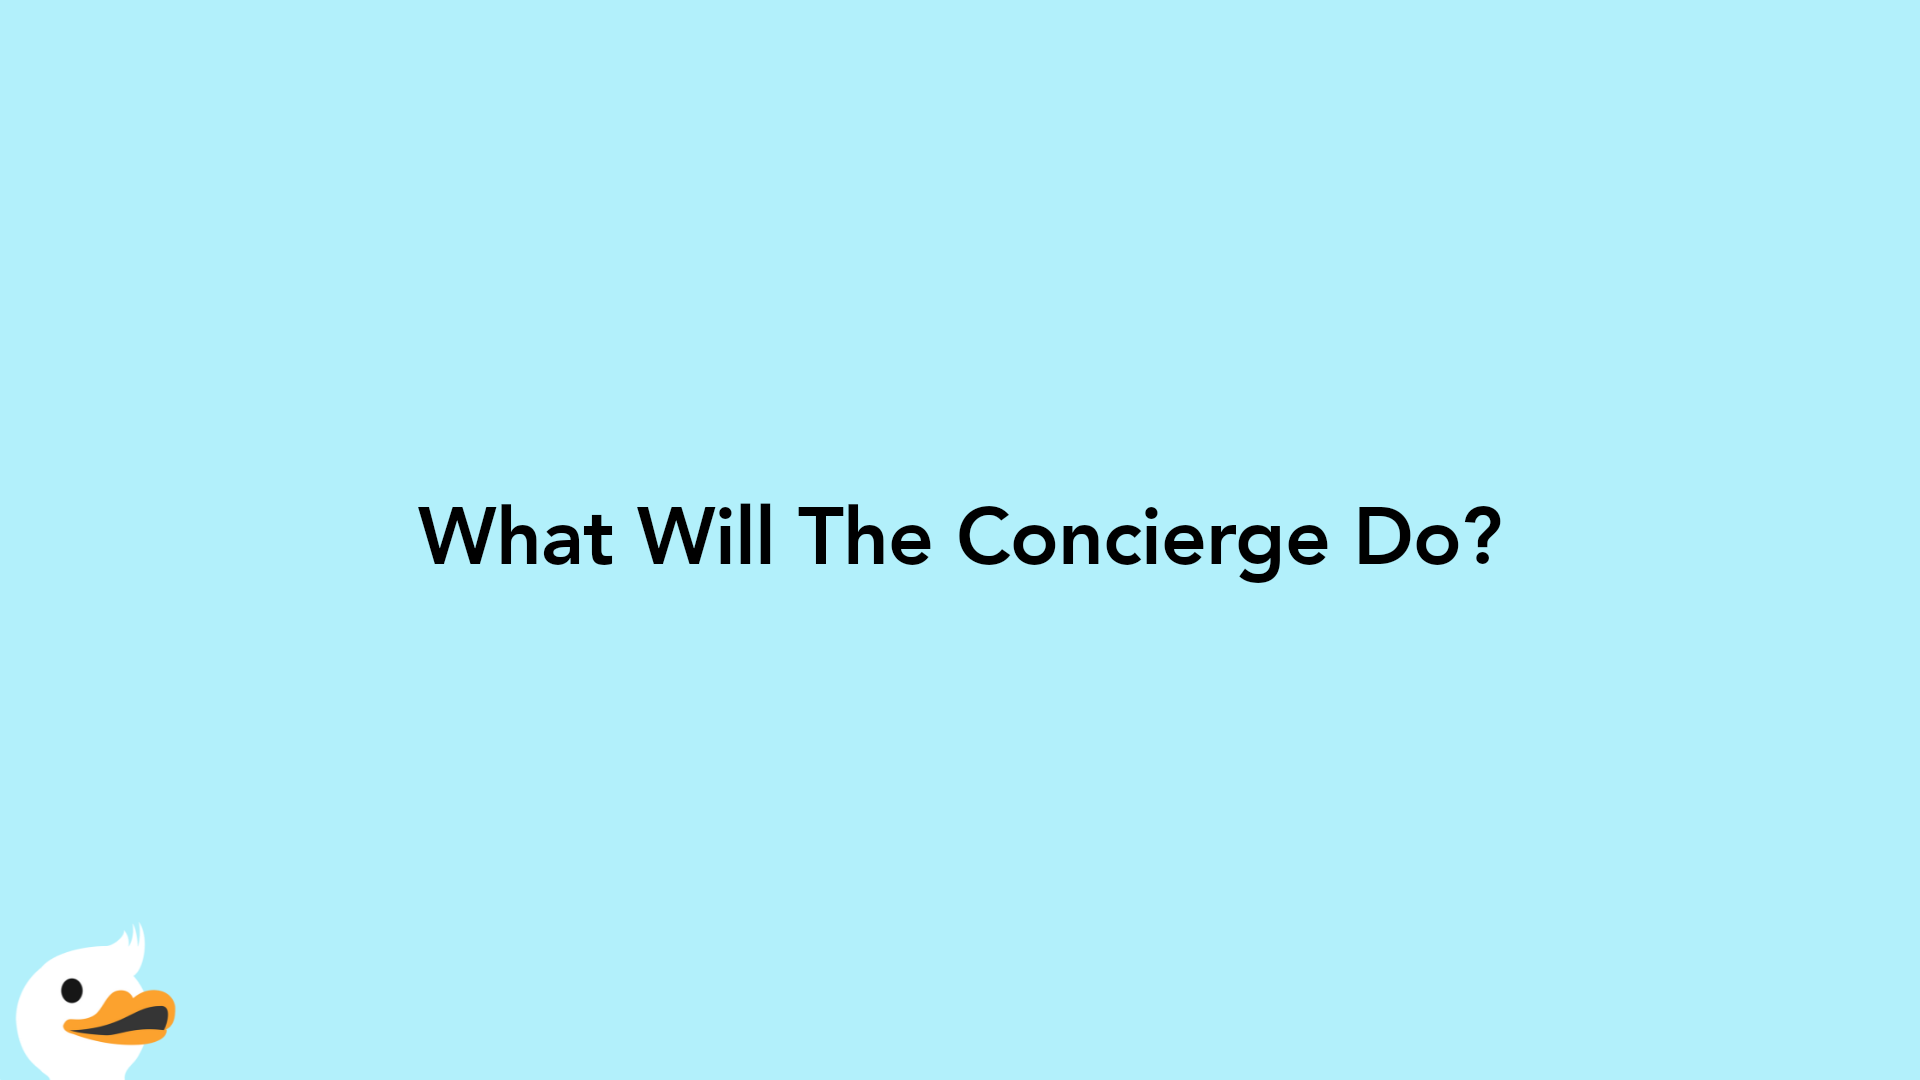 What Will The Concierge Do?